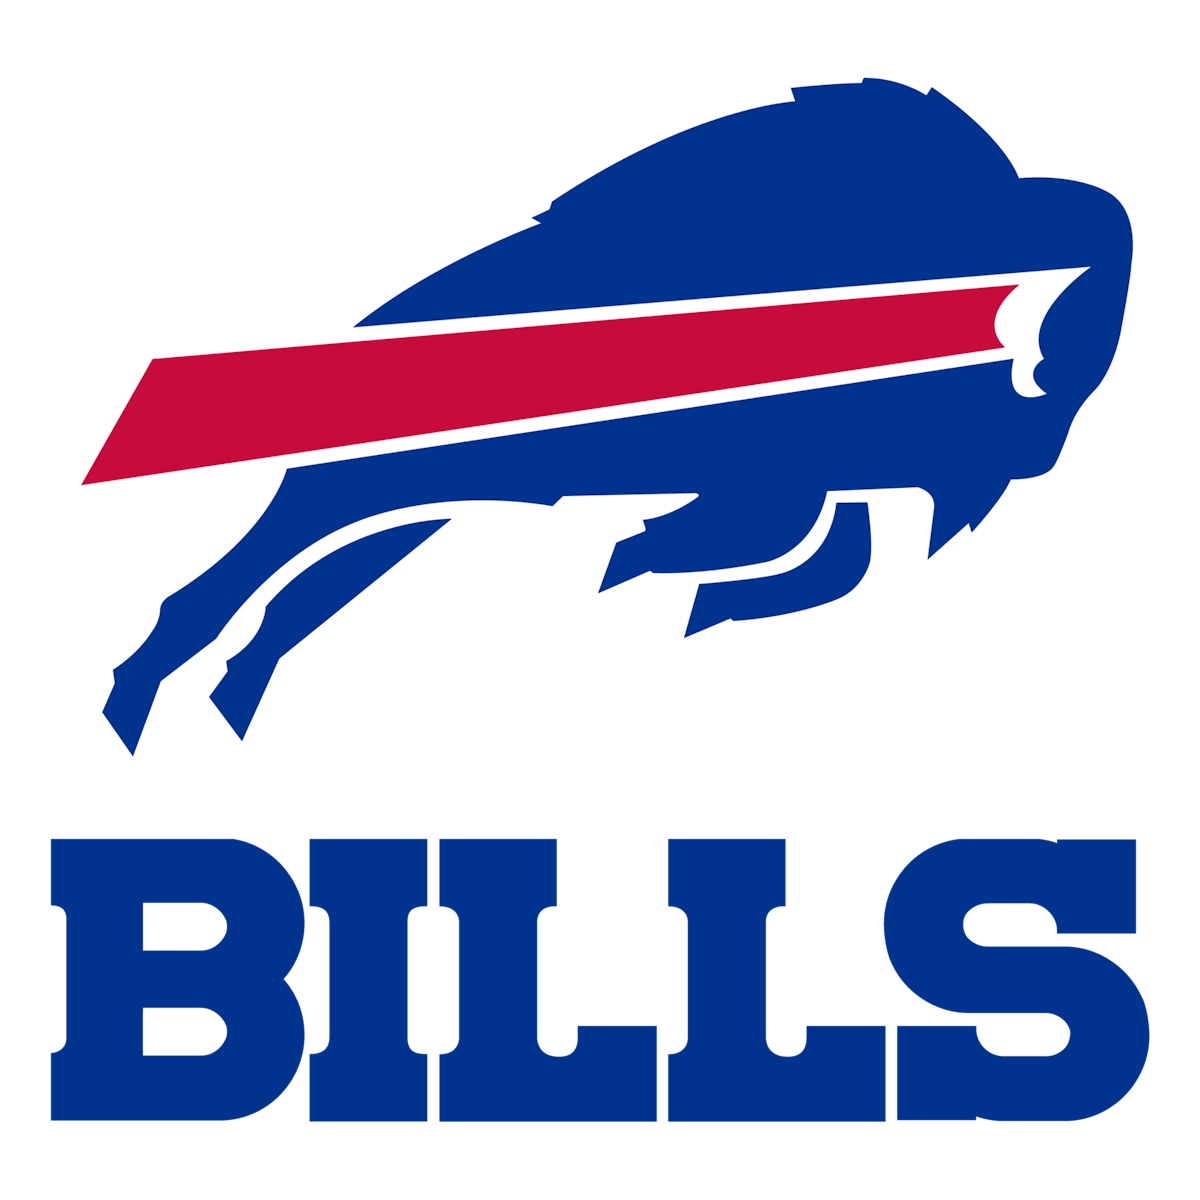 AP source: Hurley agrees to new contract at Buffalo, Sports